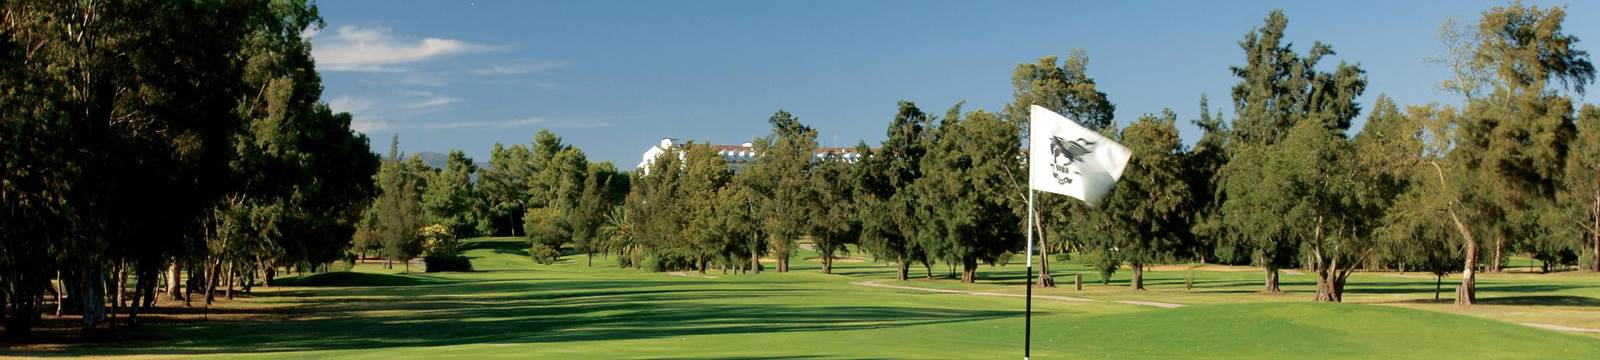 17th Hole on the Resort Course at Penina Hotel and Golf Resort